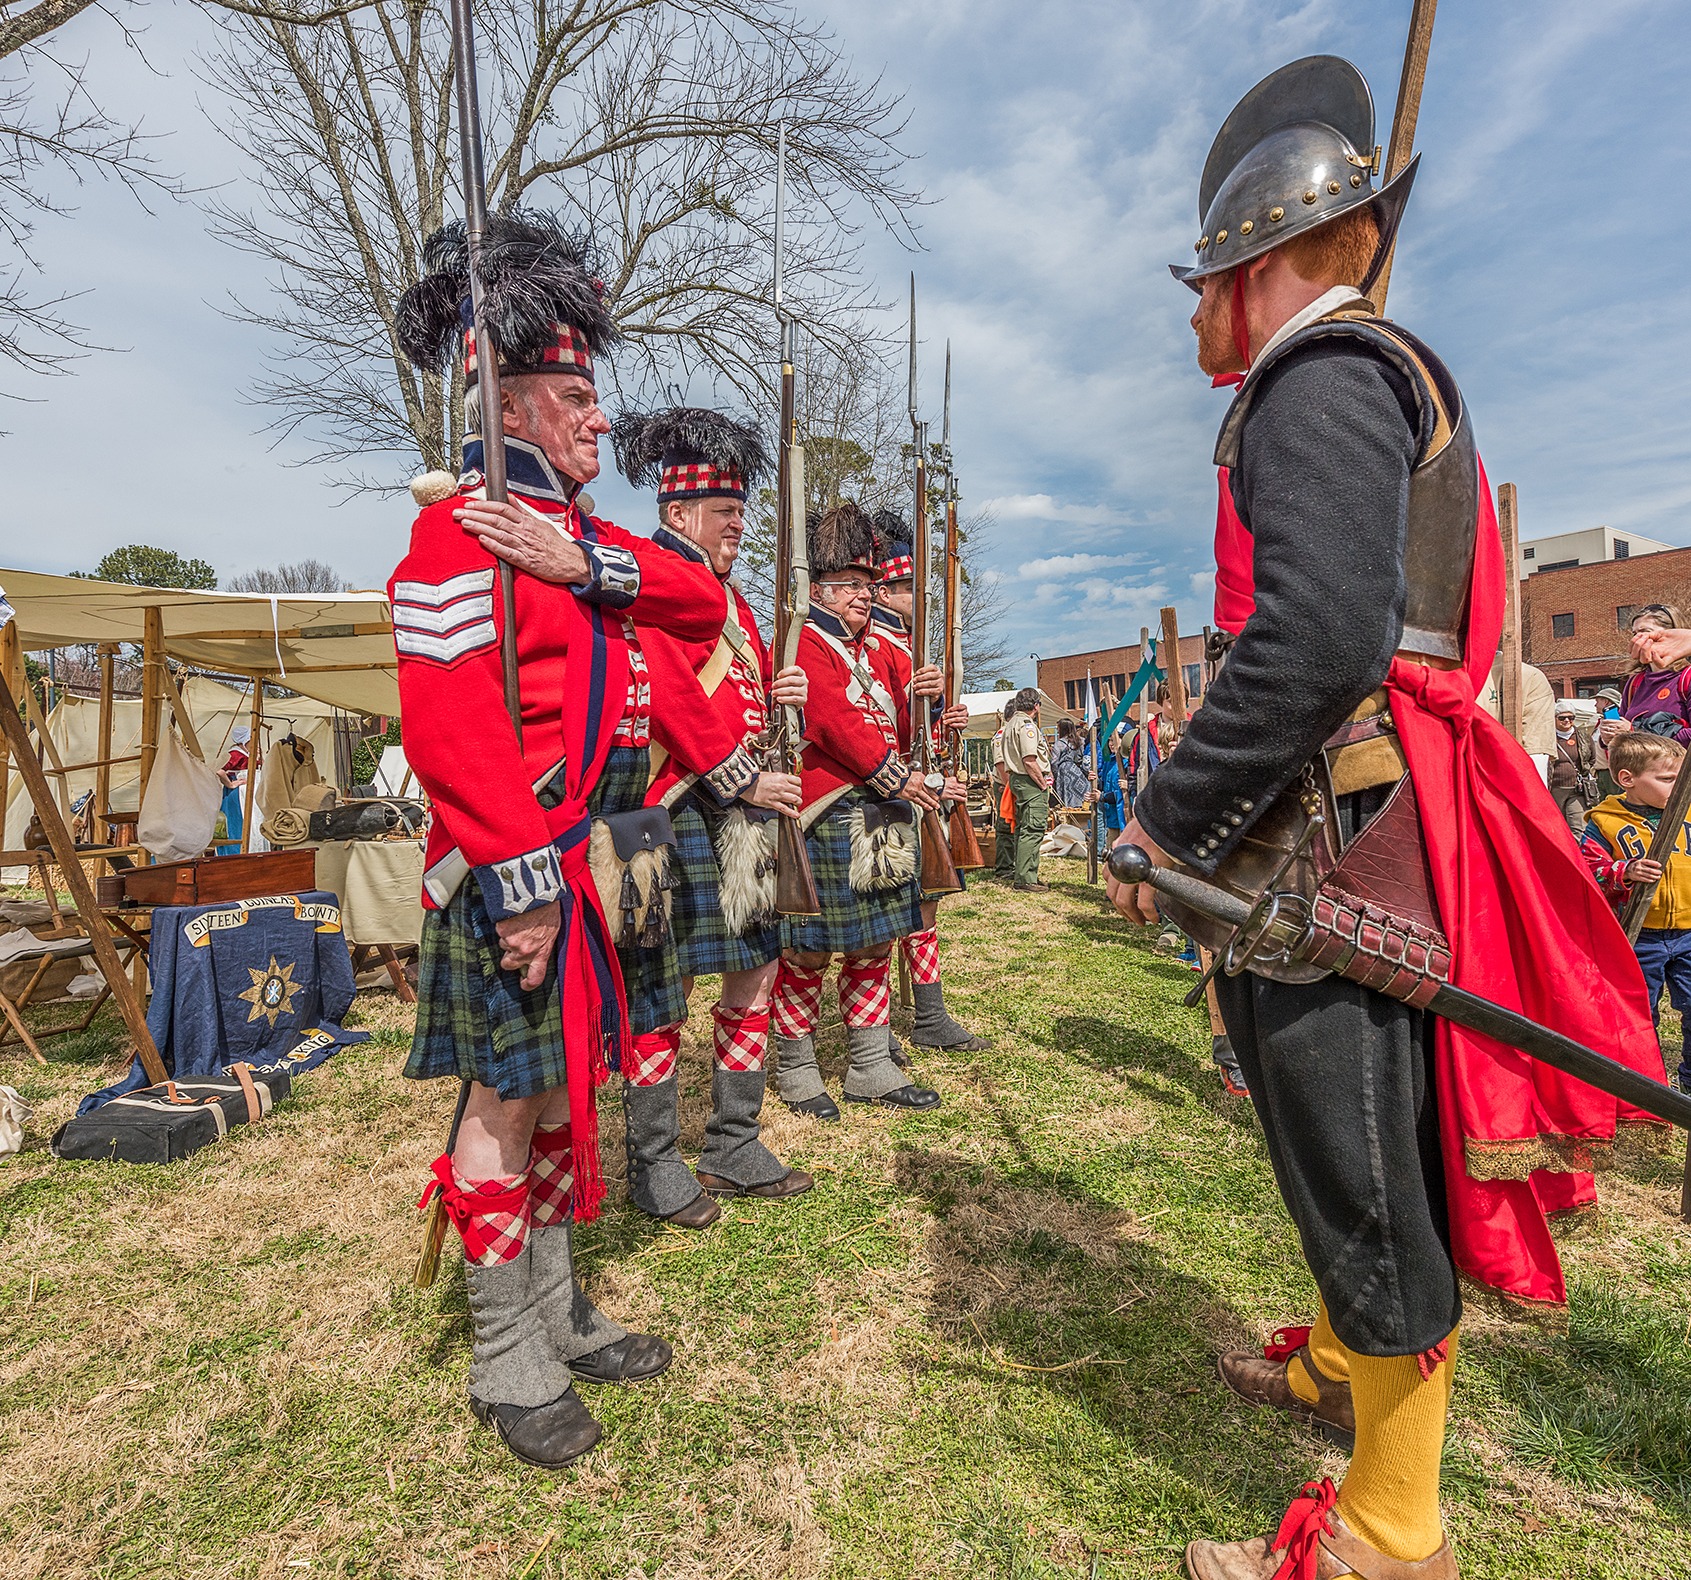 Military Through The Ages event at Jamestown Settlement